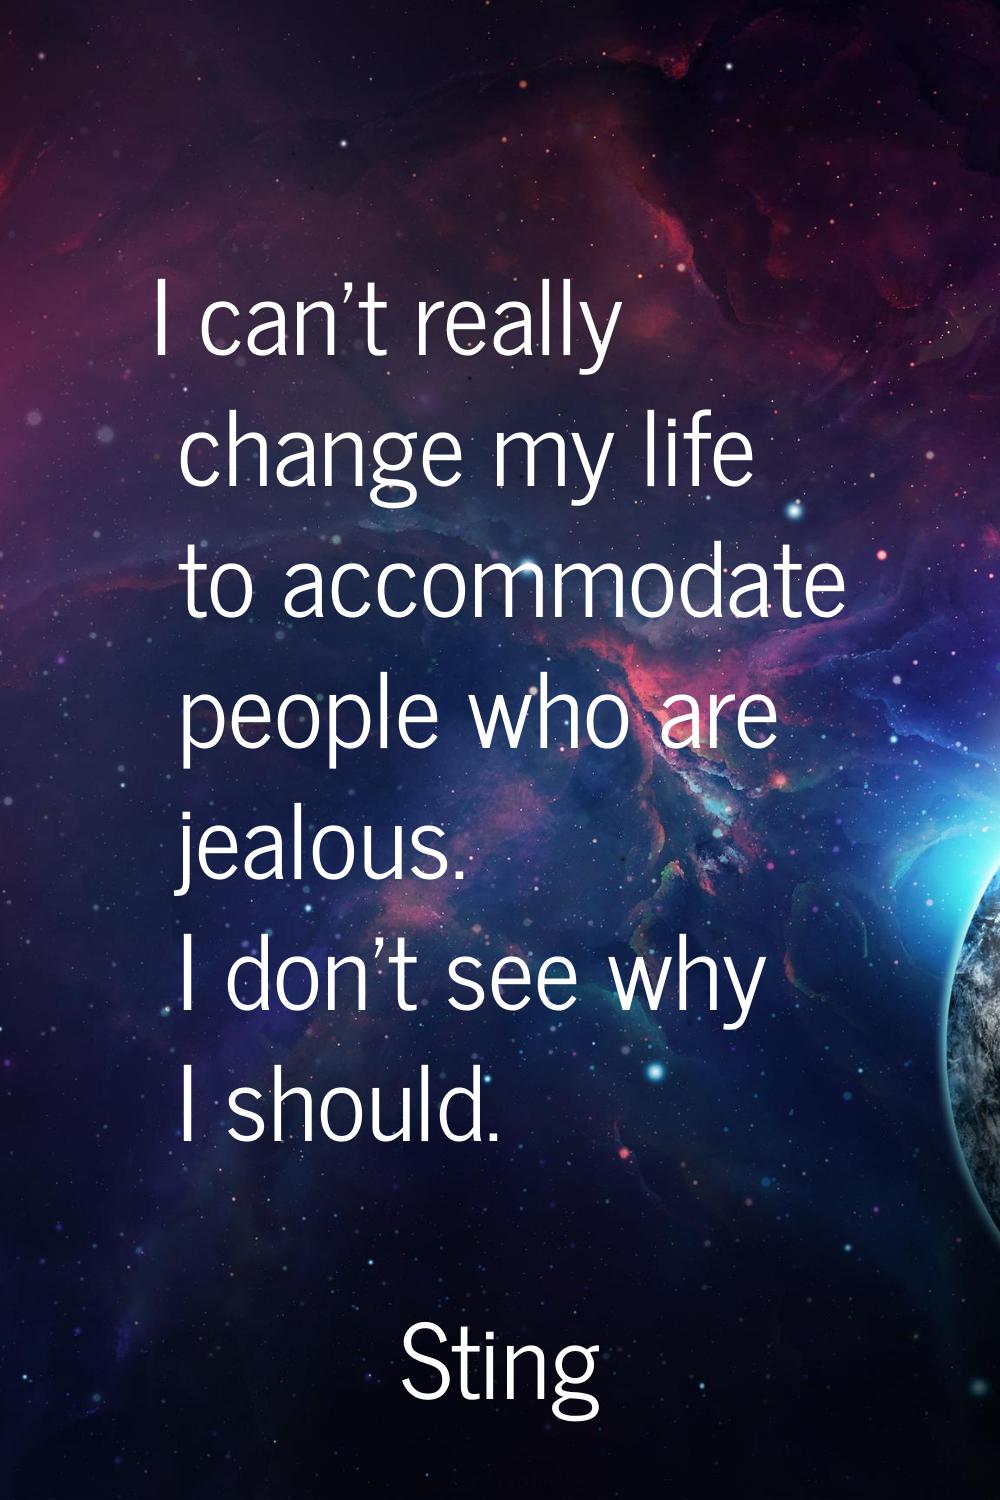 I can't really change my life to accommodate people who are jealous. I don't see why I should.